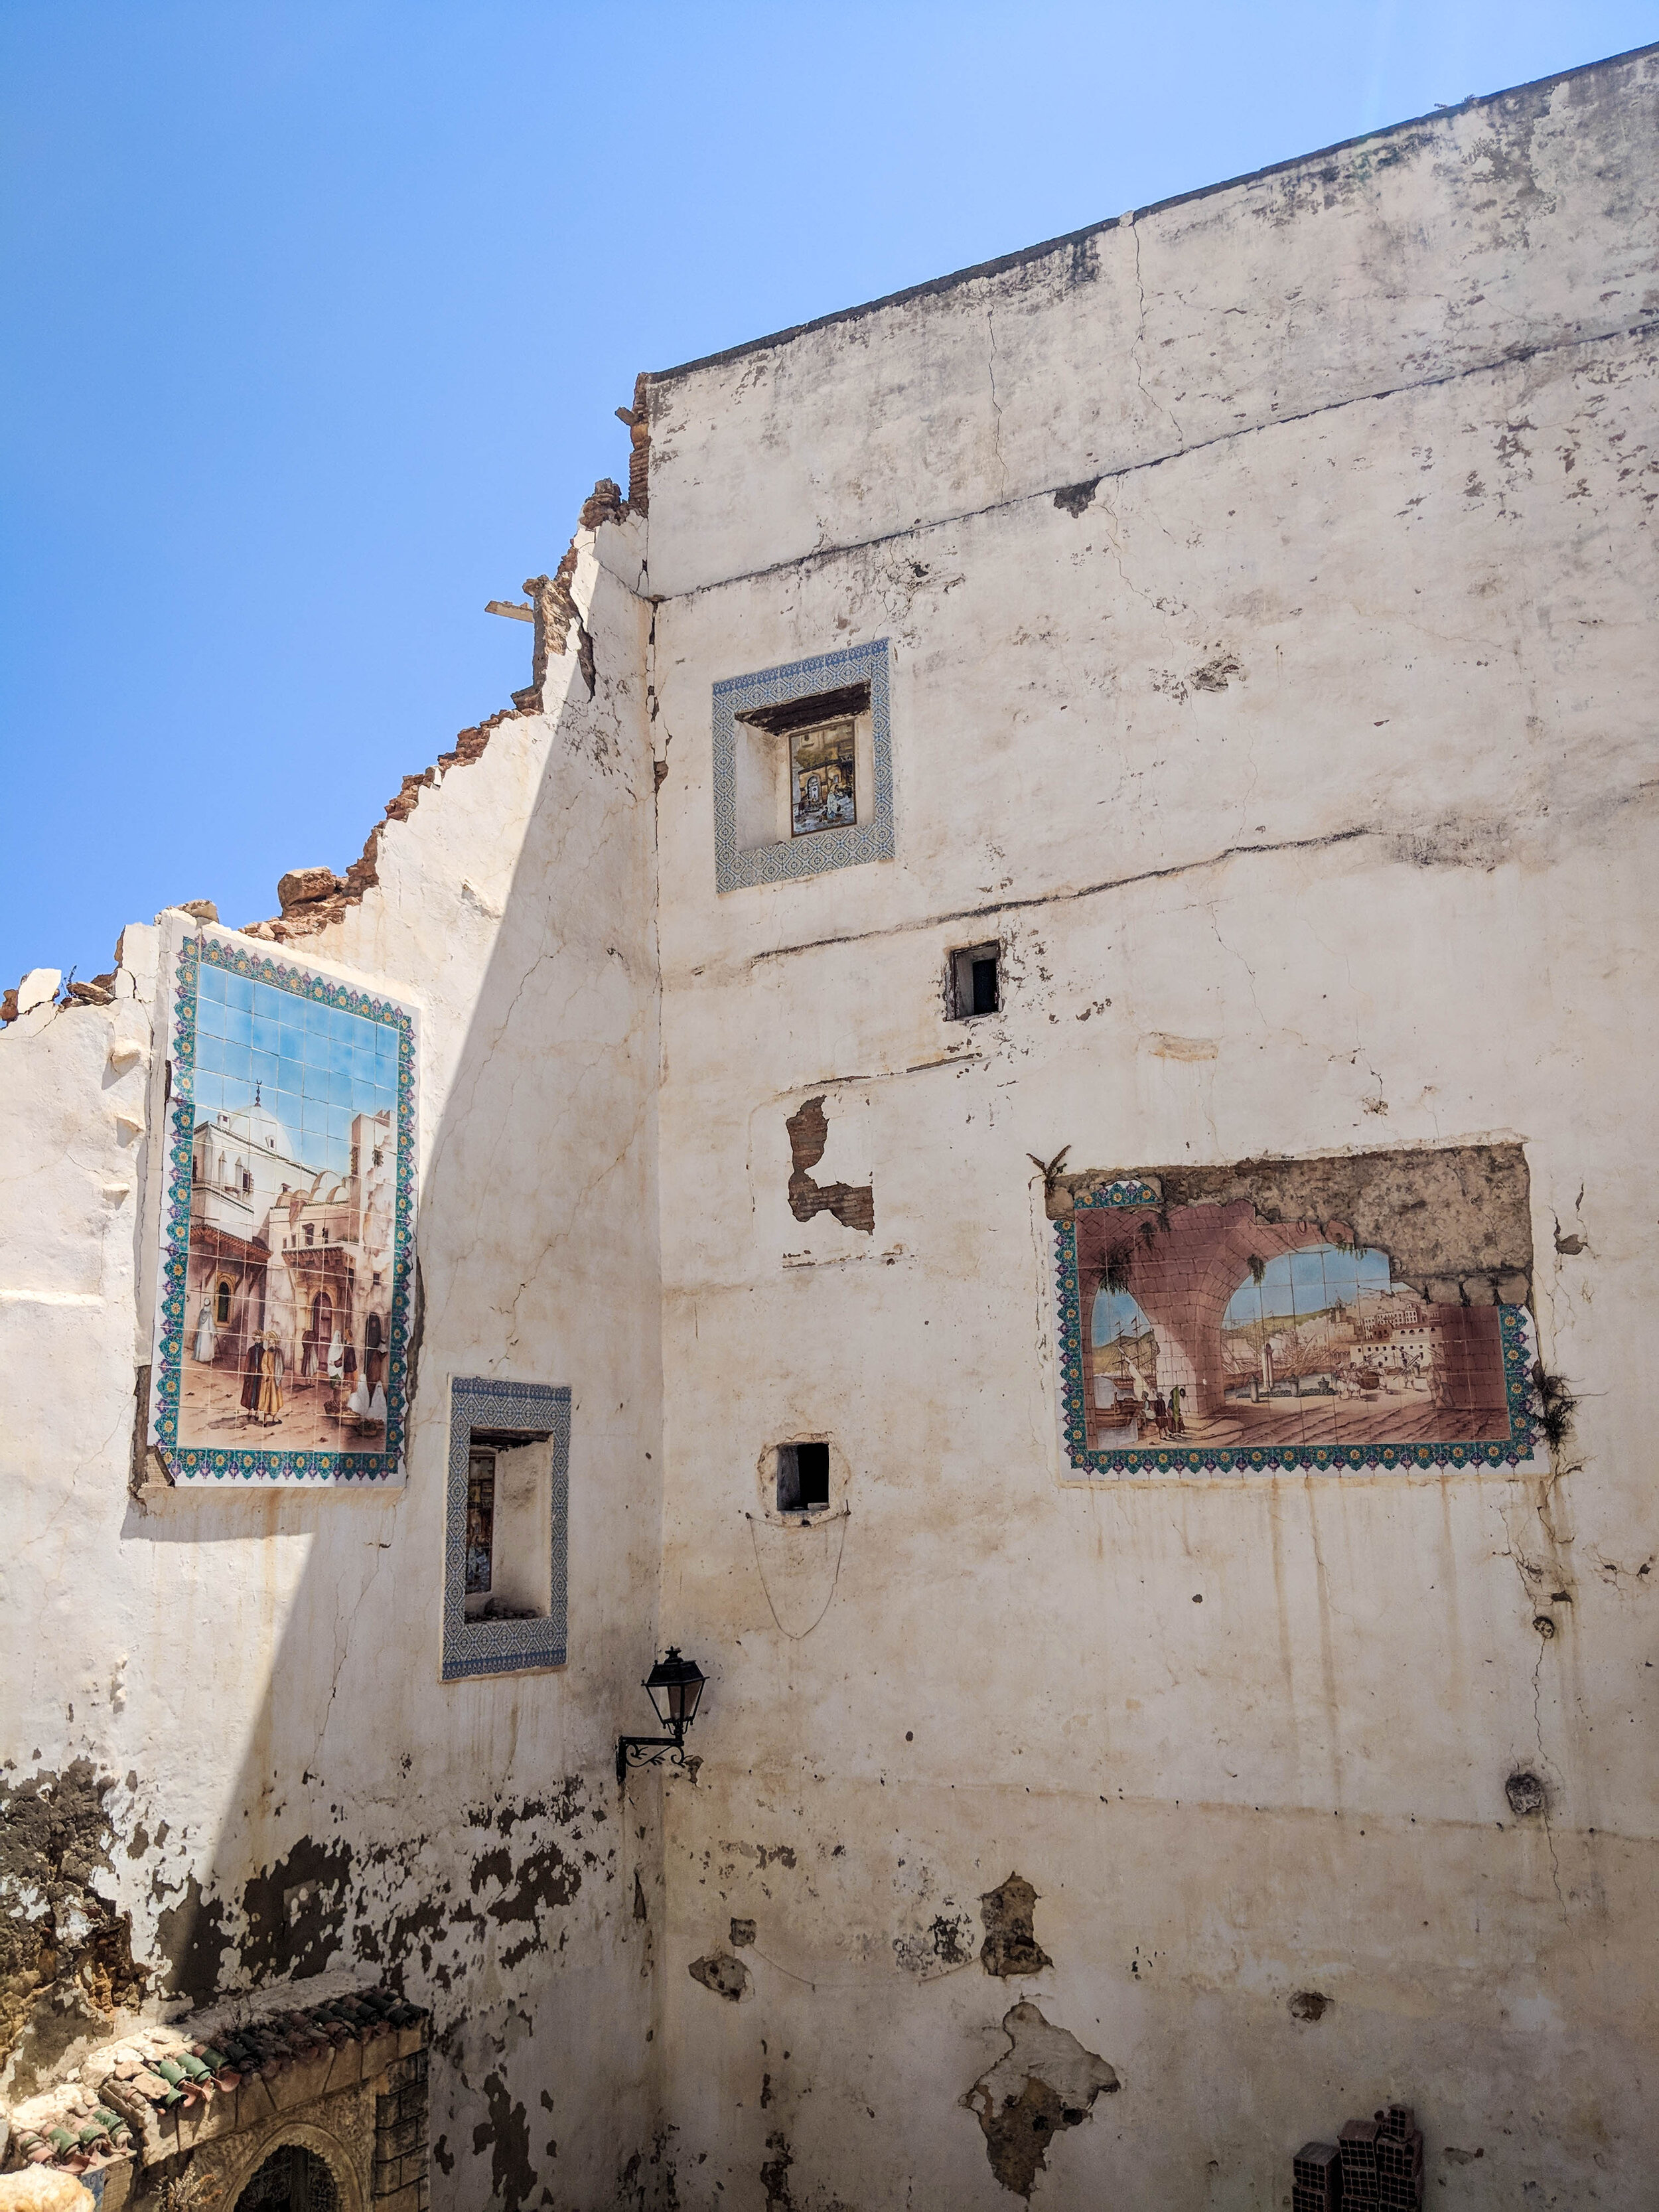 Decaying building in Algiers Casbah